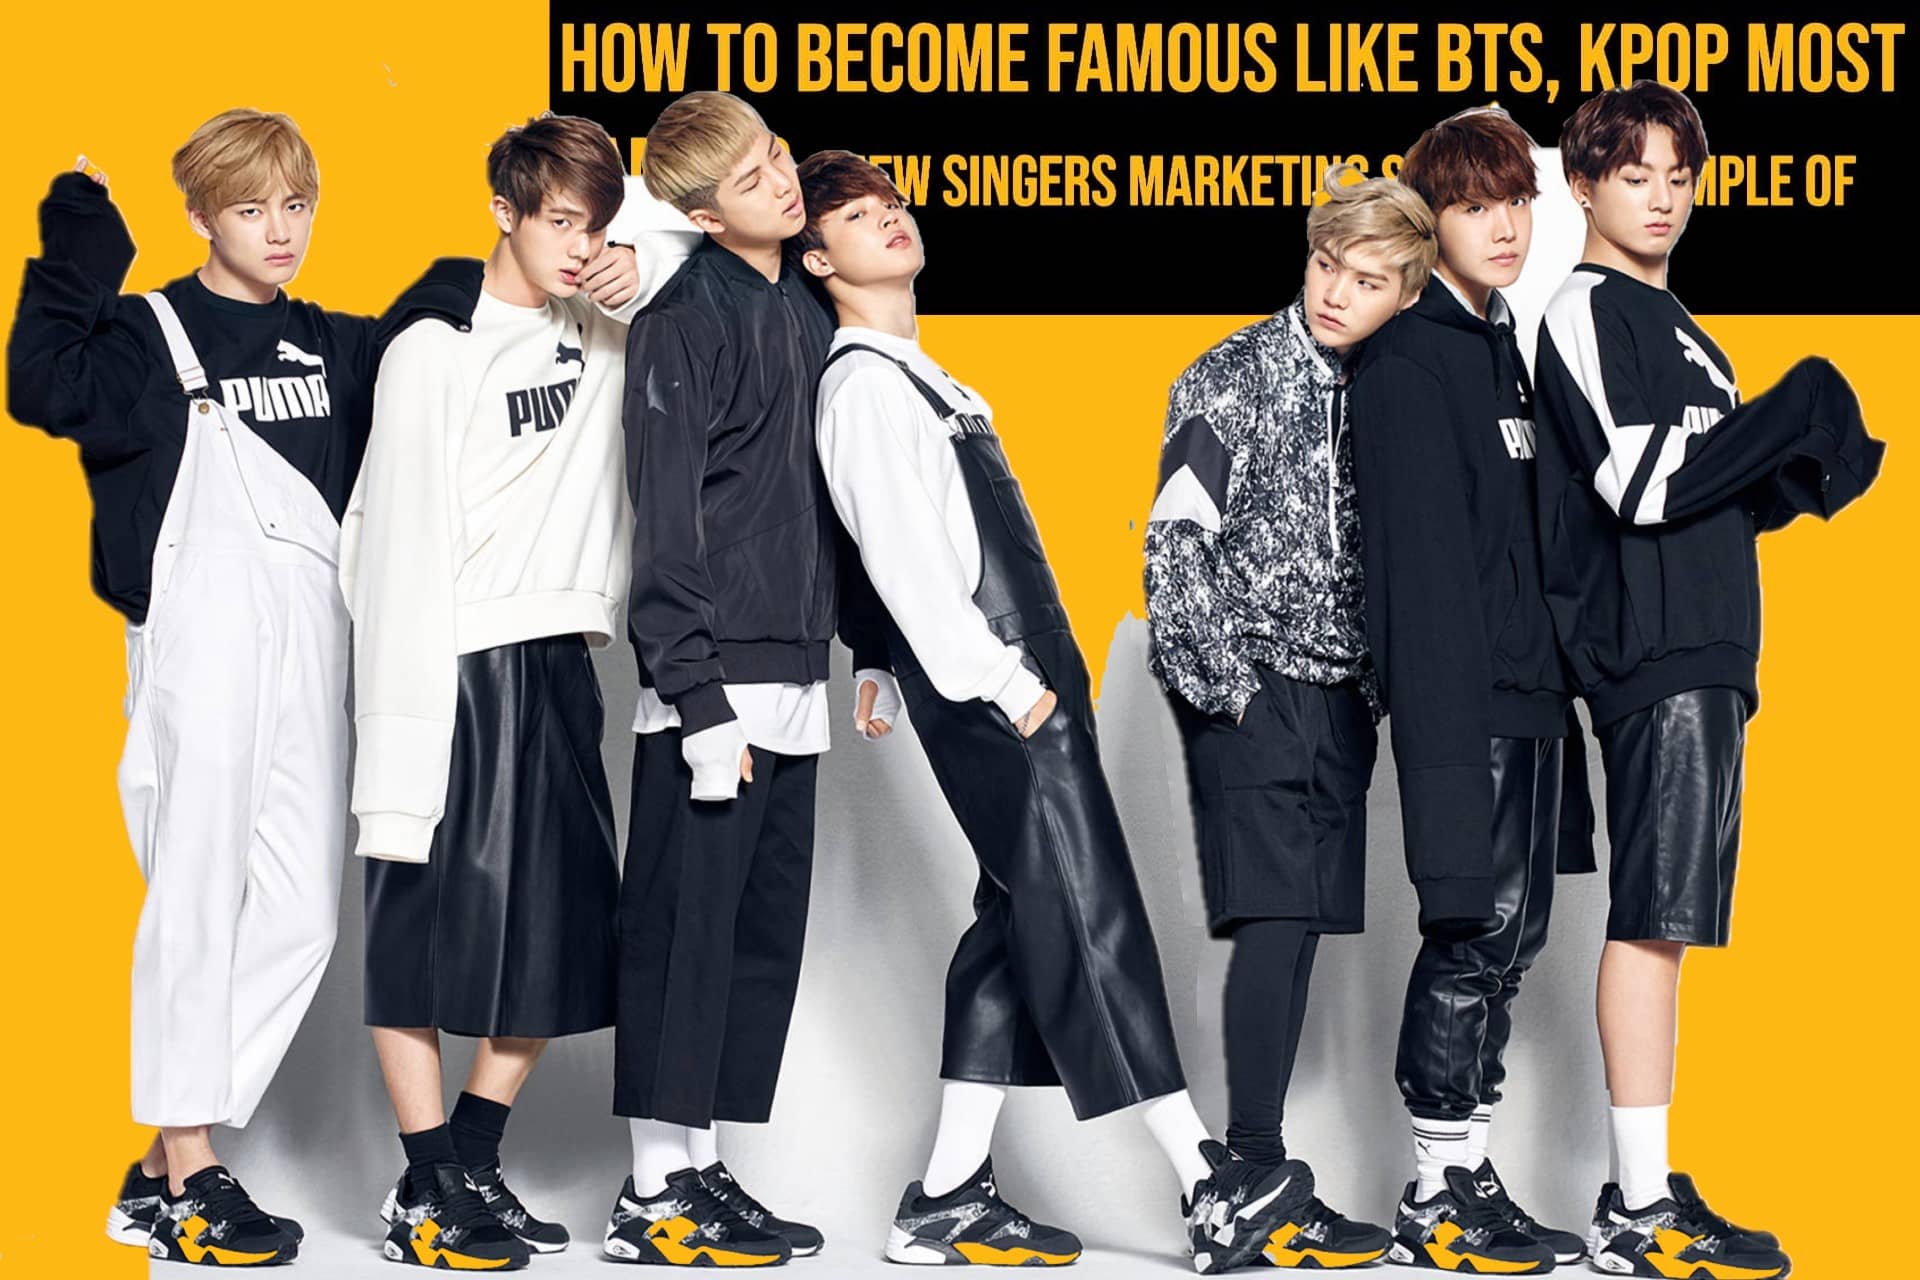 BTS BECOME FAMOUS - NEW SINGERS and FAMOUS SINGERS- HOW TO BECOME FAMOUS